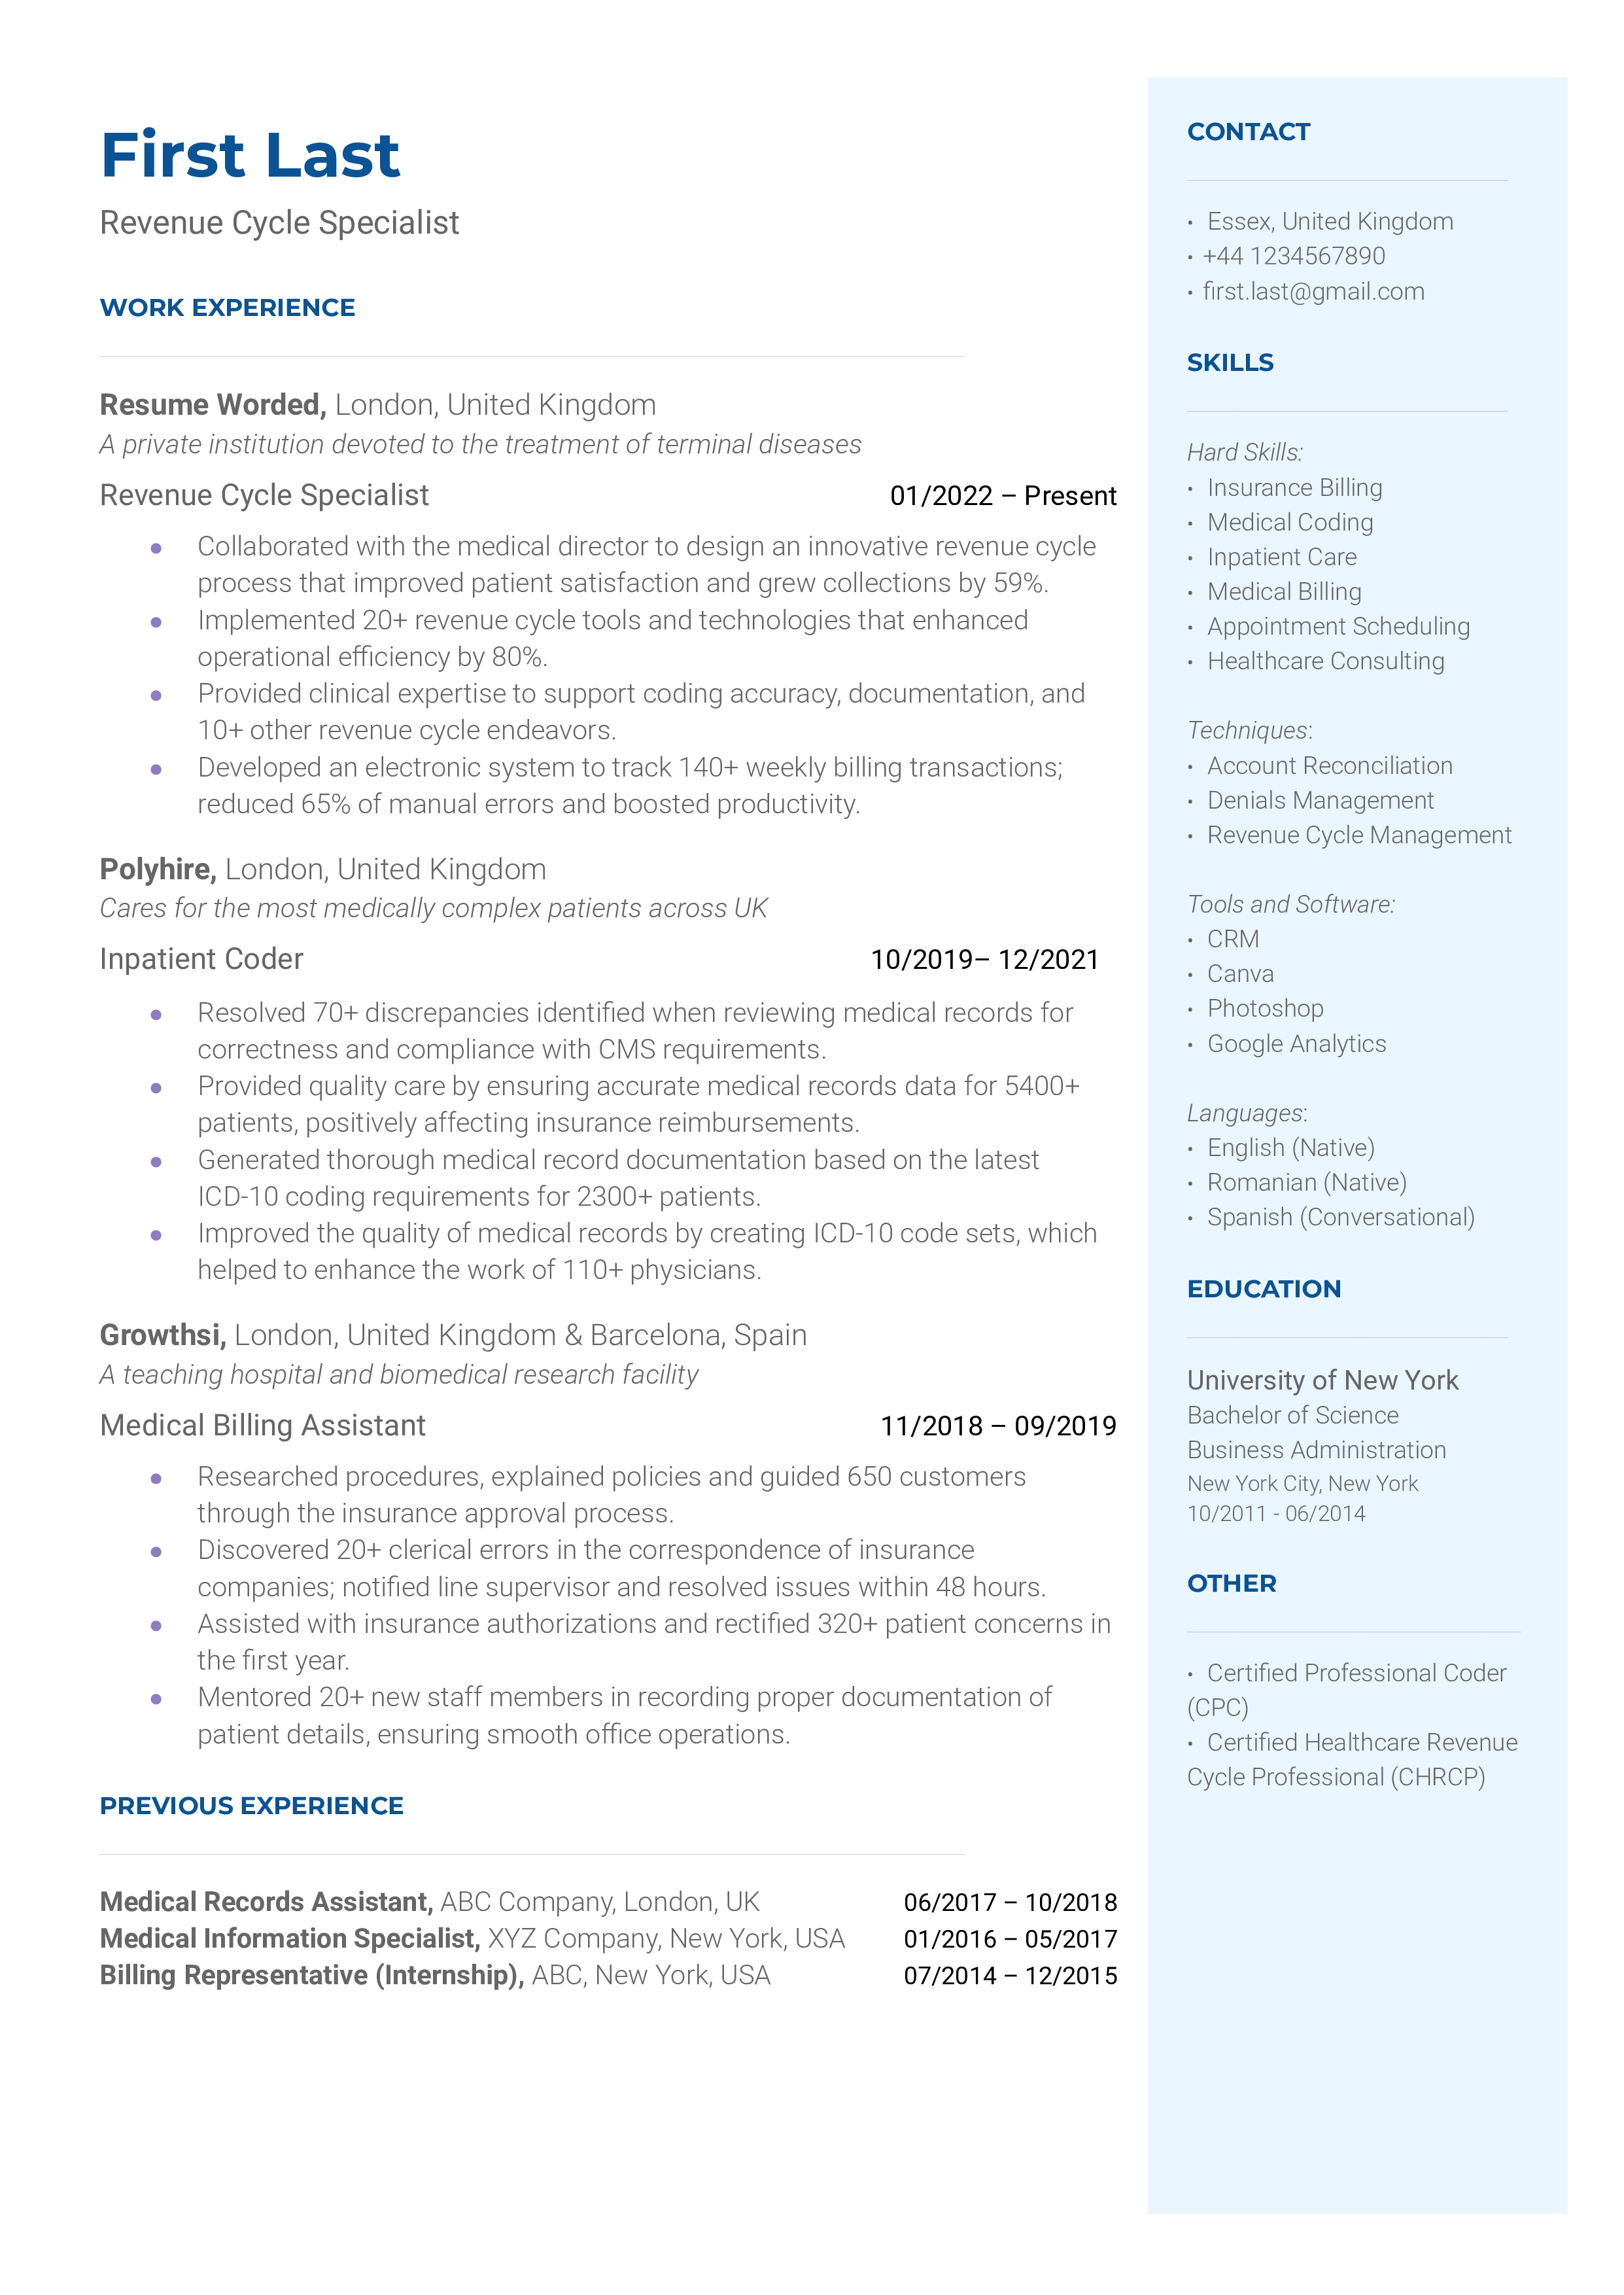 A revenue cycle specialist resume template that emphasizes technical skills and knowledge of industry tools. 